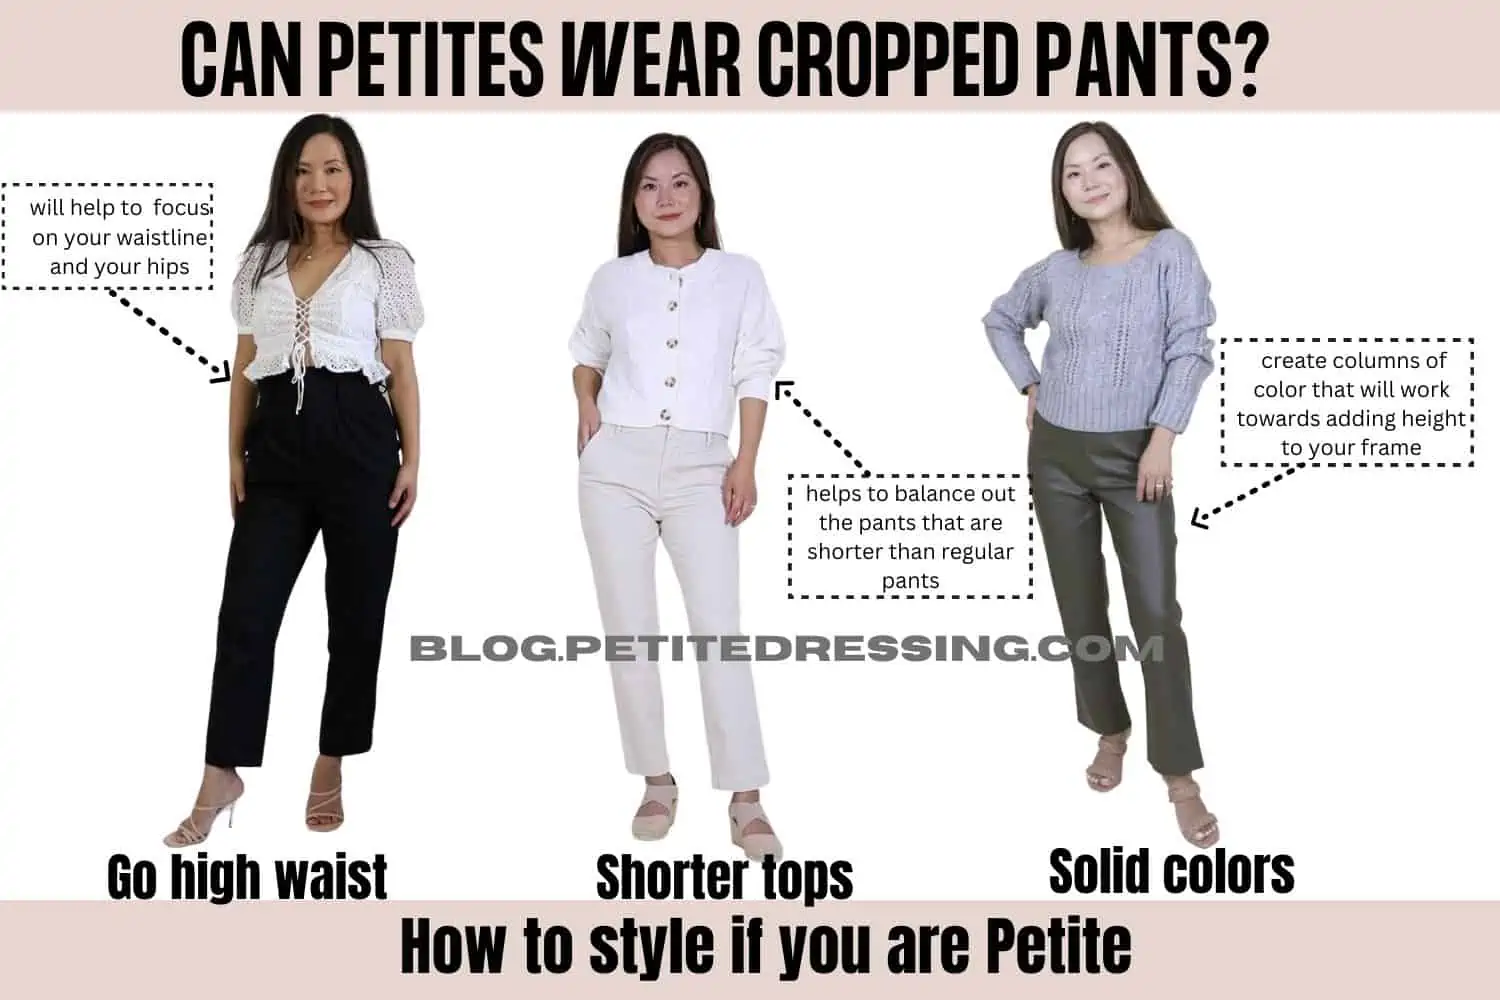 https://blog.petitedressing.com/wp-content/uploads/2022/12/How-to-style-if-you-are-Petite.webp